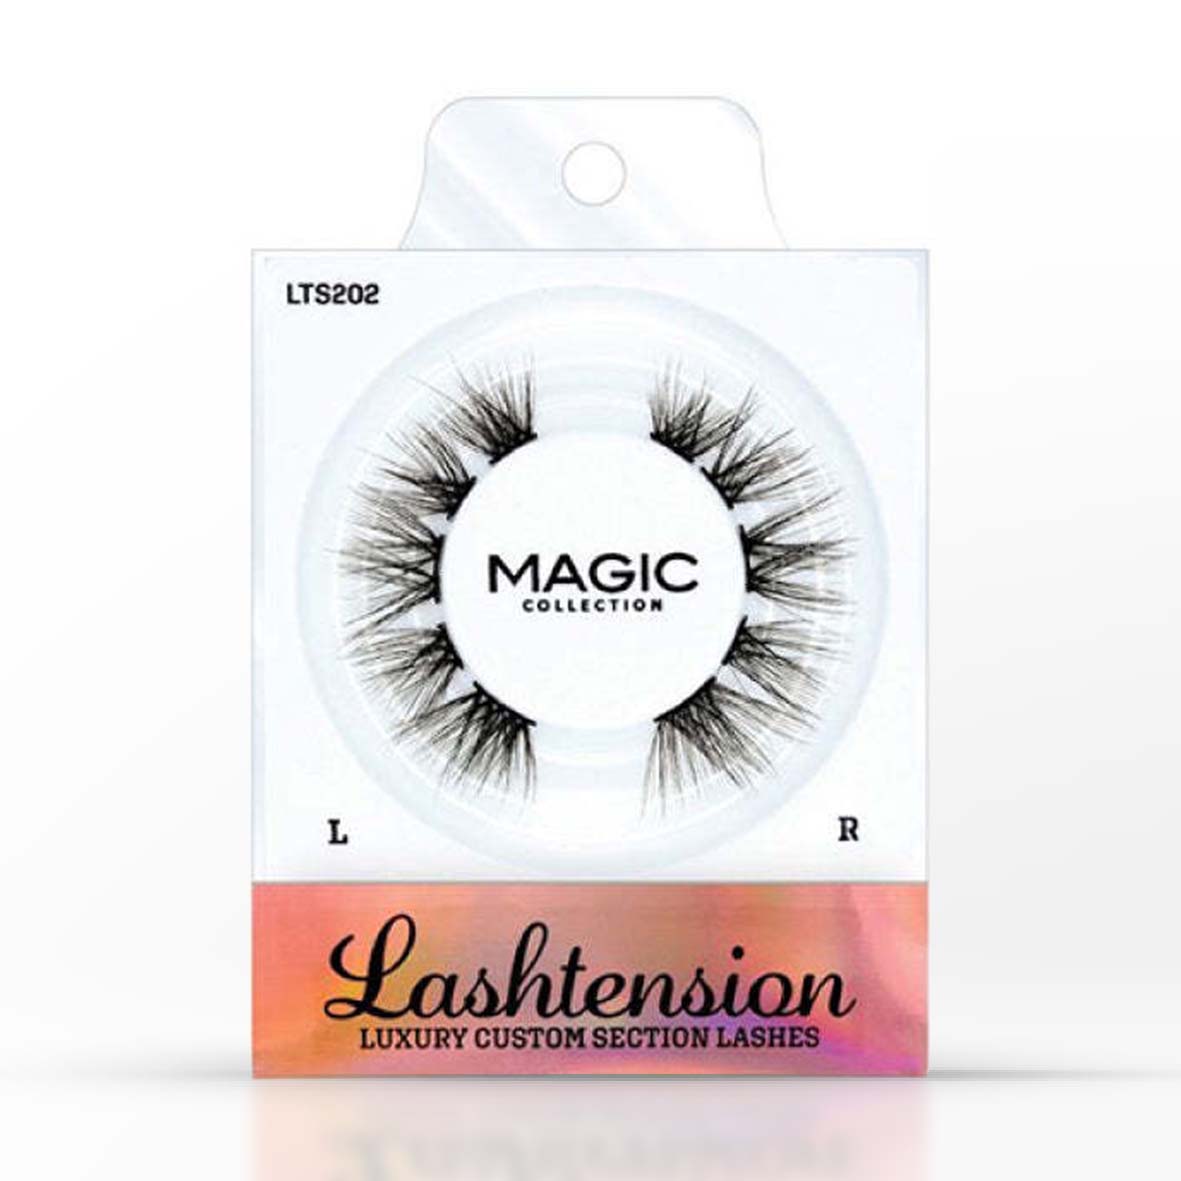 MAGIC COLLECTION LASHTENSION LUXRUY CUSTOM SECTION LASHES (LTS202)